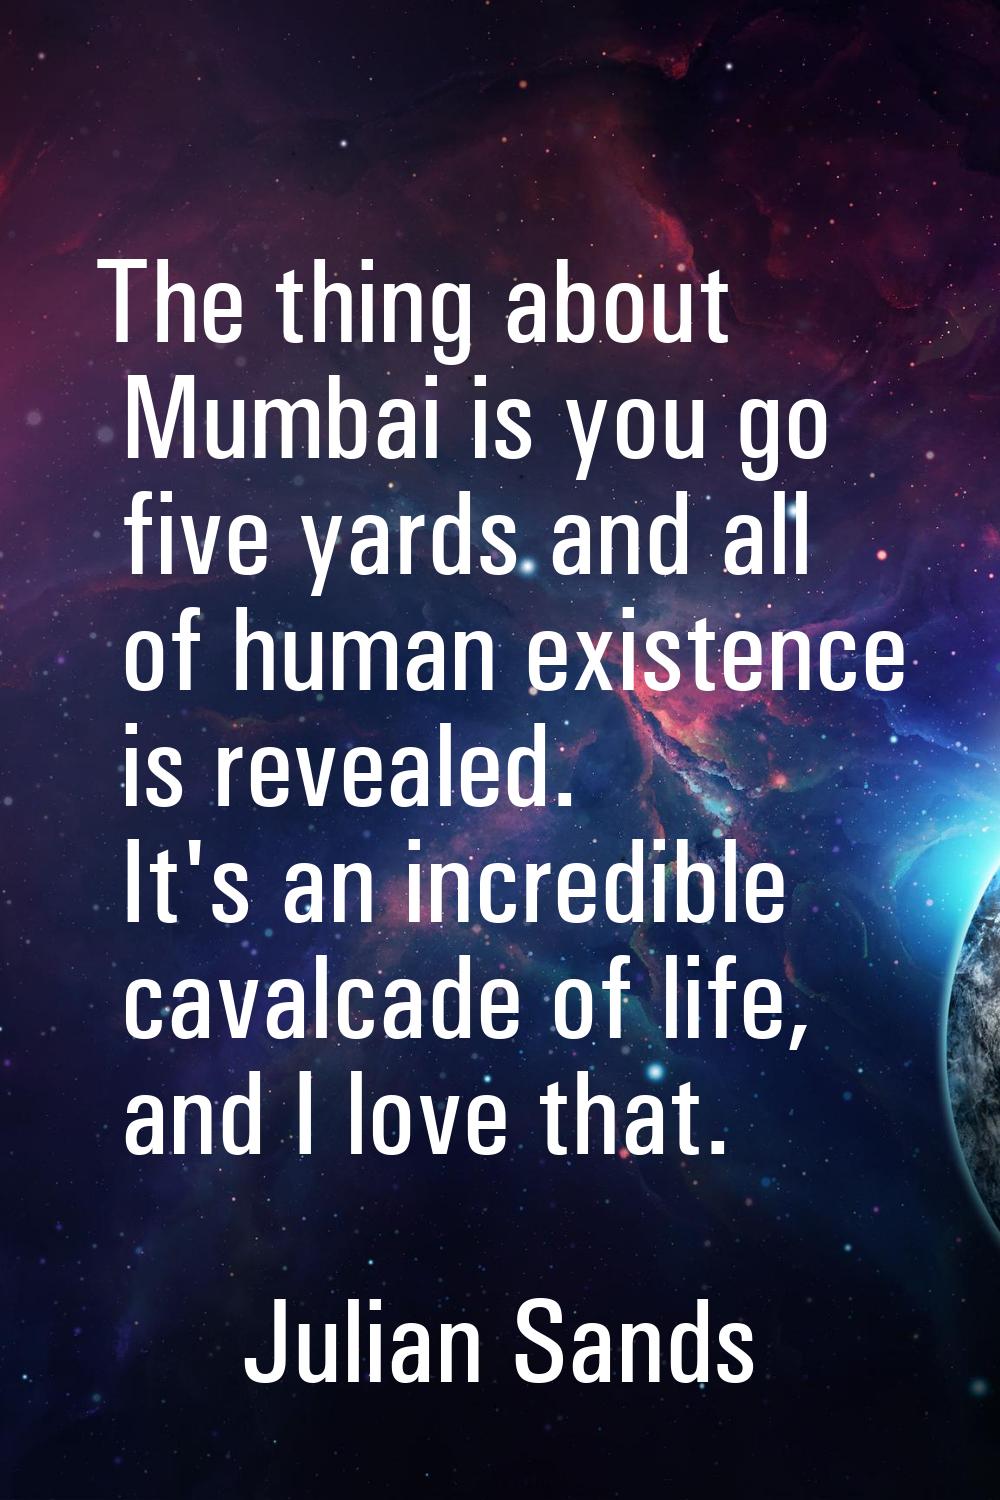 The thing about Mumbai is you go five yards and all of human existence is revealed. It's an incredi